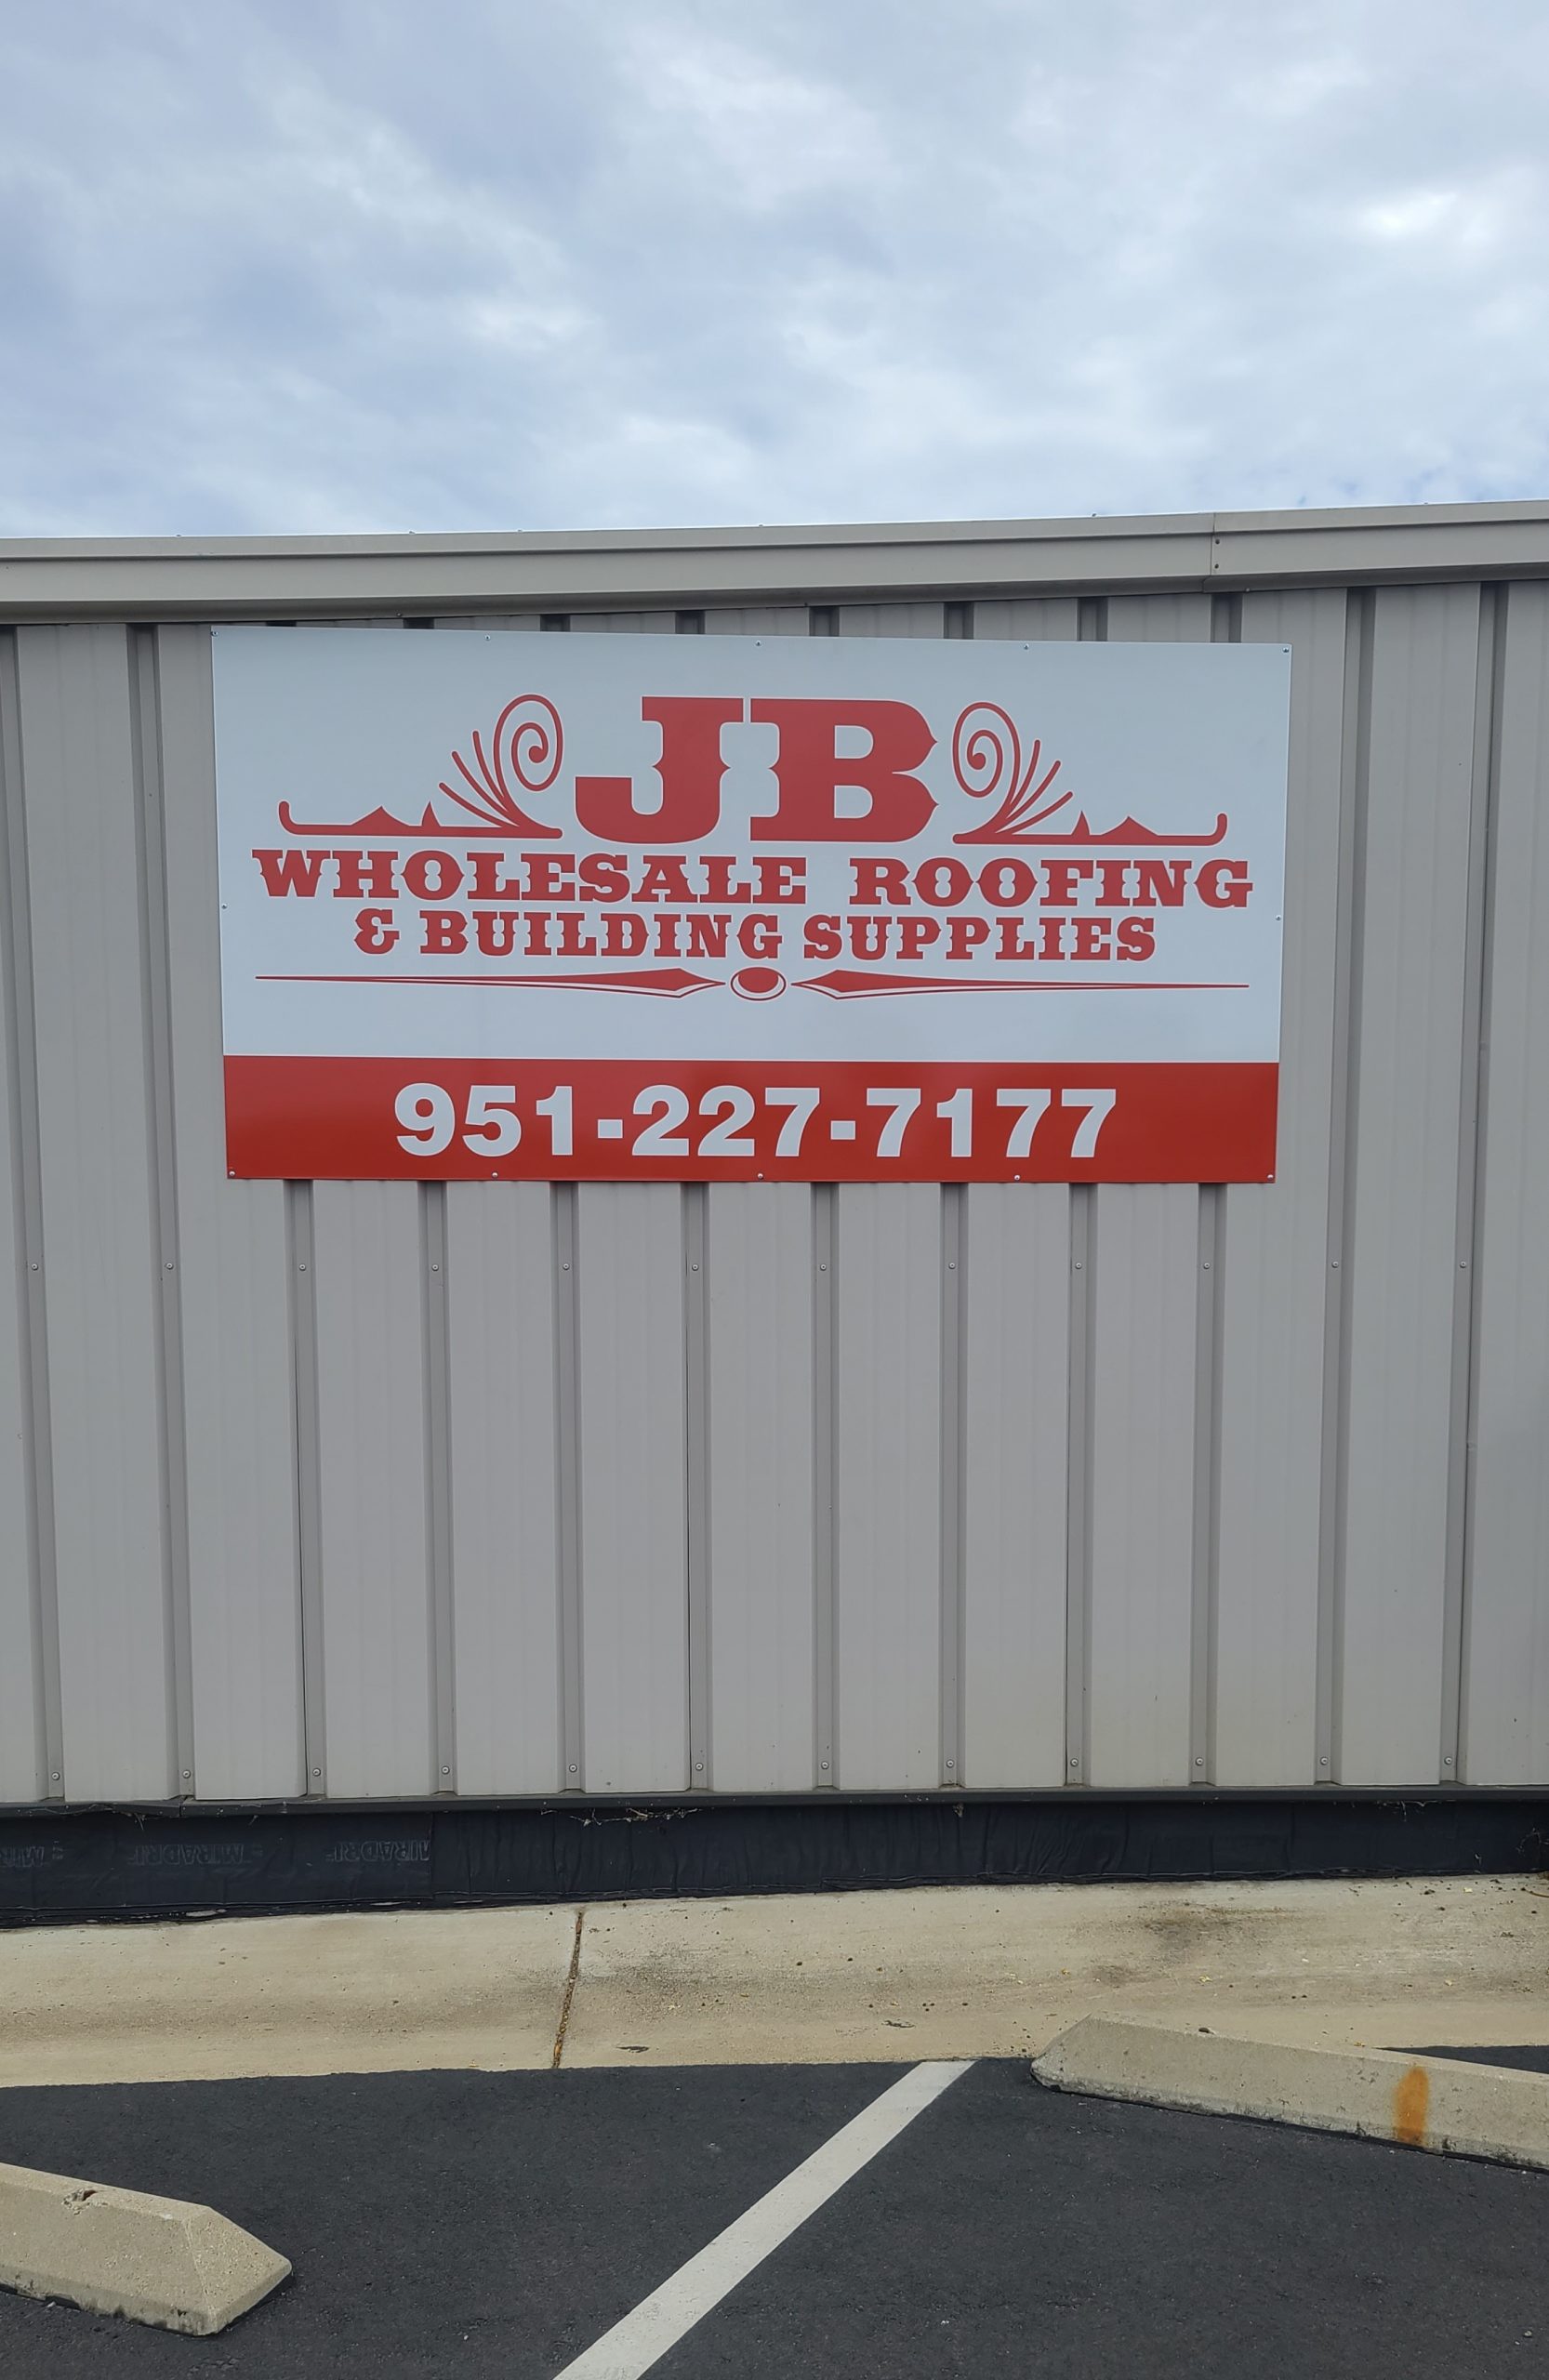 This metal panel sign for JB Wholesale Roofing's parking lot in Murietta features their logo and contact details, giving their brand more visibility.